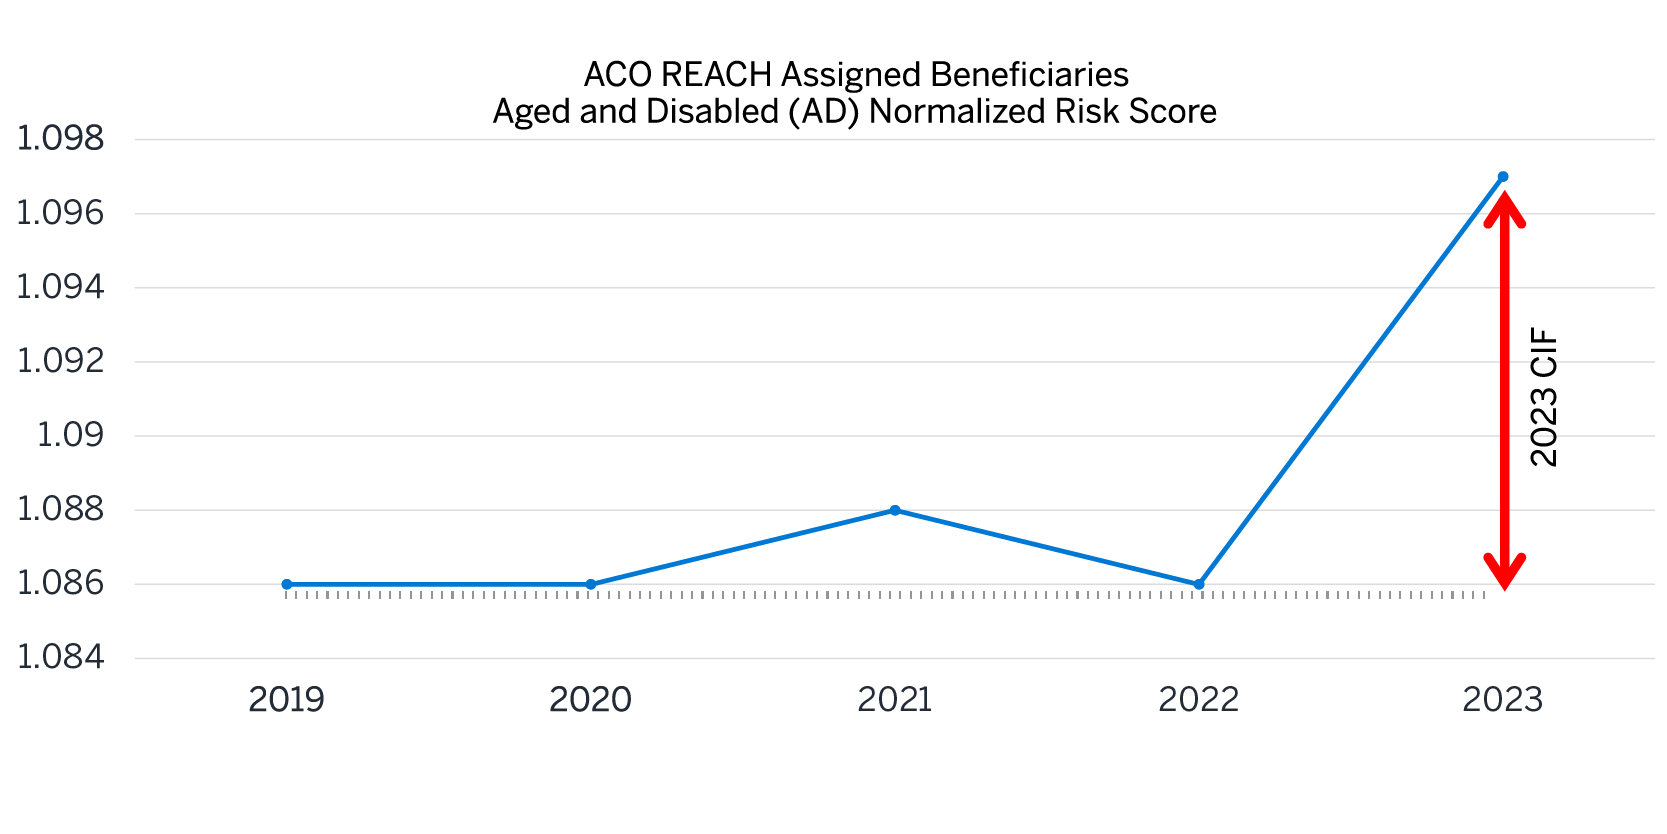 ACO REAACH Assigned Beneficiaries Aged and Disabled (AD) Normalized Risk Score